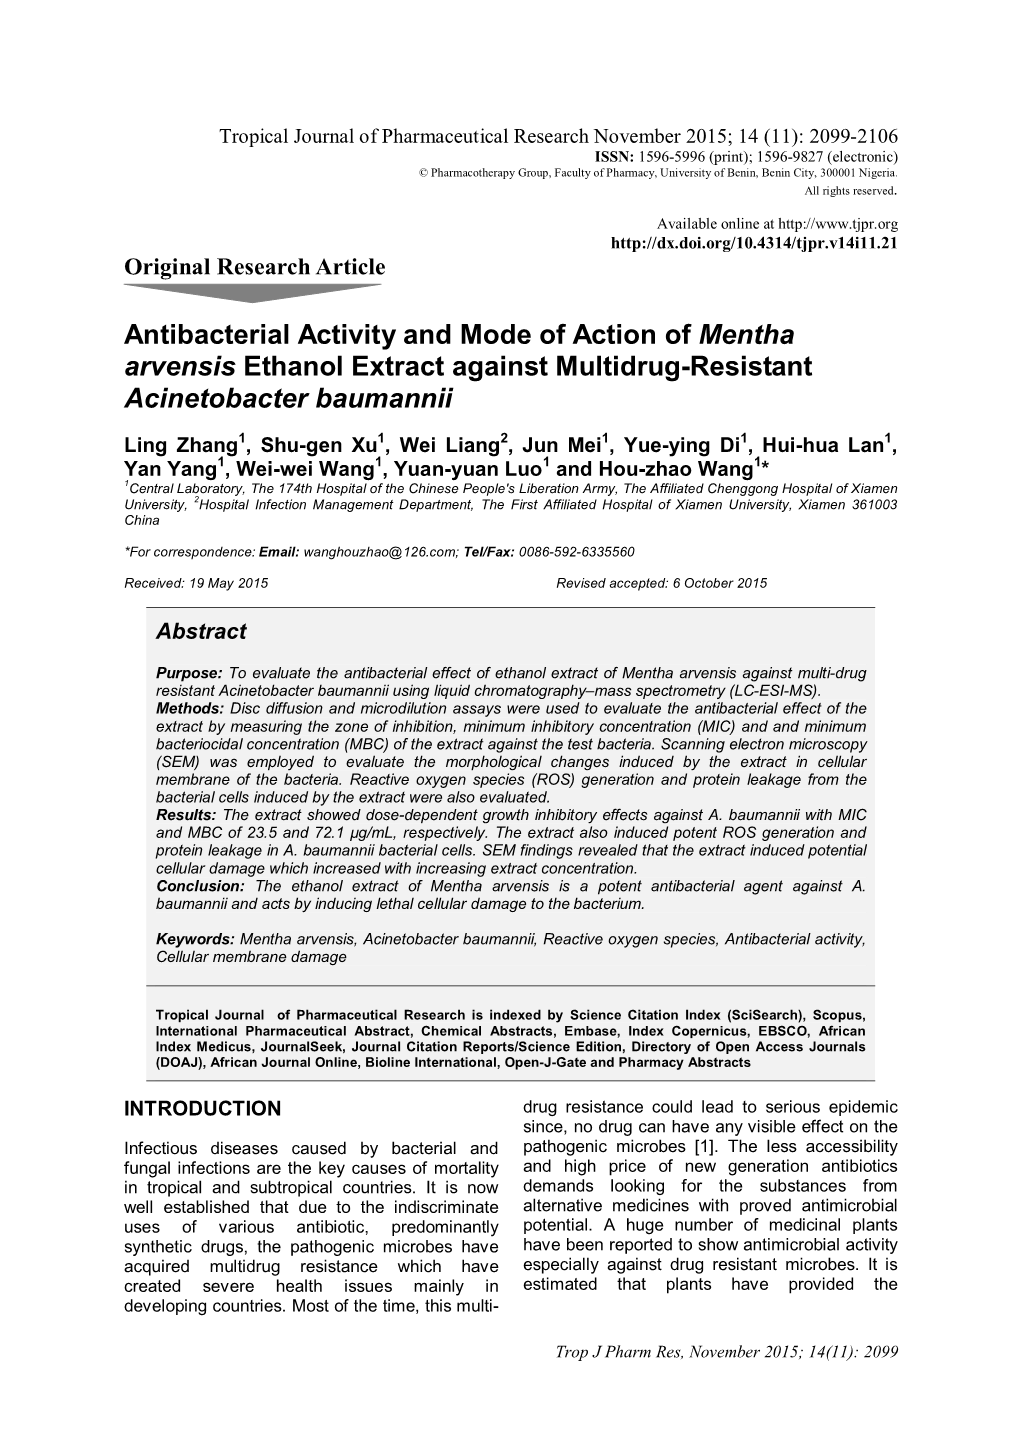 Antibacterial Activity and Mode of Action of Mentha Arvensis Ethanol Extract Against Multidrug-Resistant Acinetobacter Baumannii